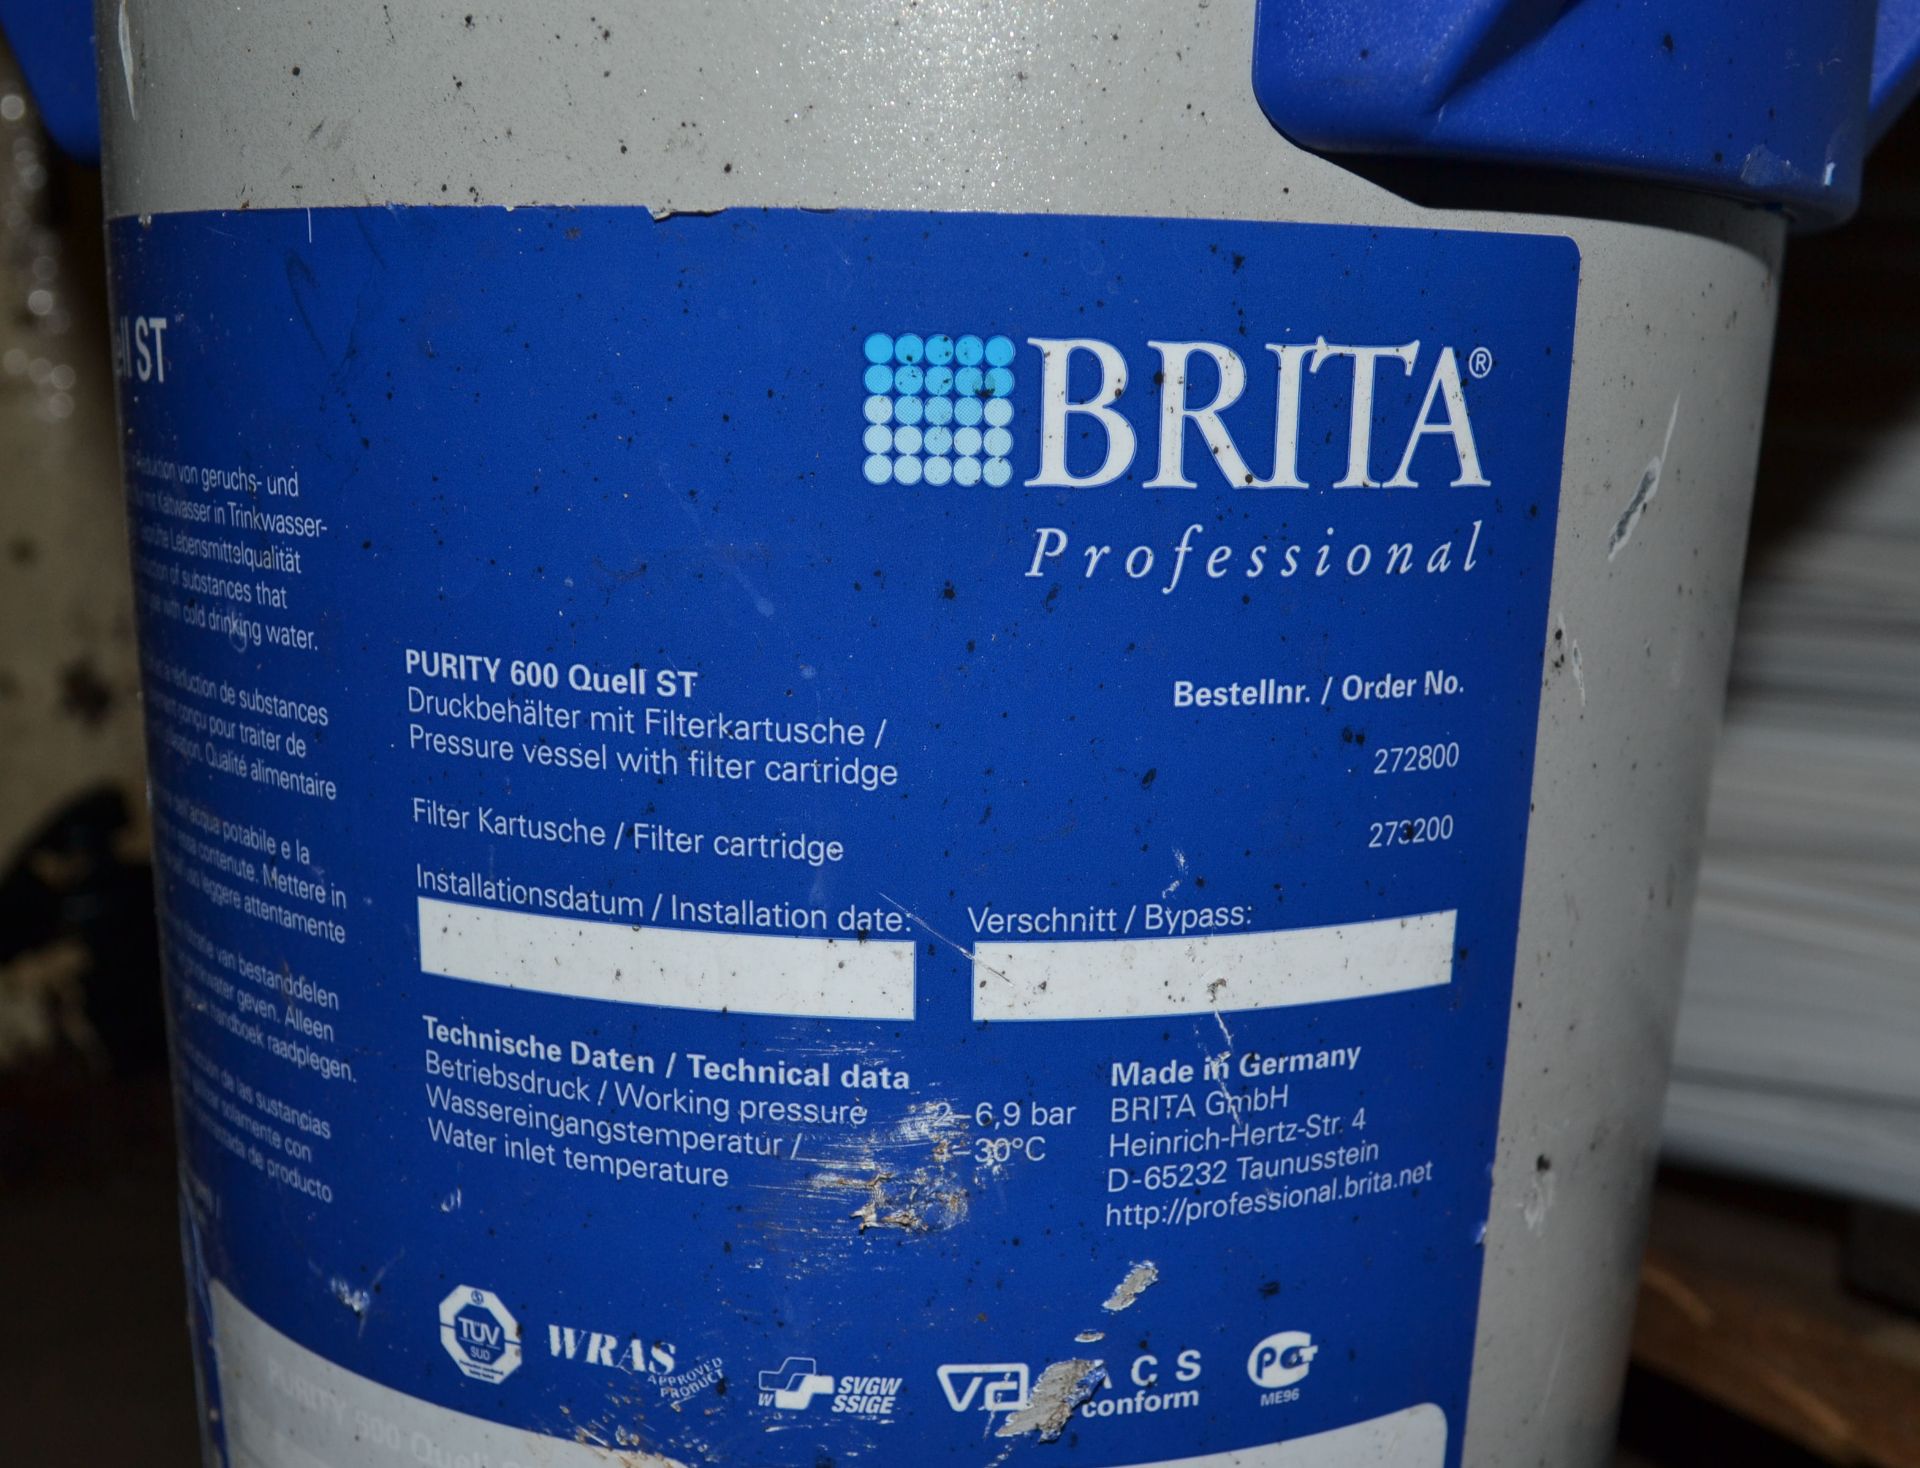 1 x Brita Professional Purity 600 Quell ST Filter - Ref: FJC007 - CL124 - Location: Bolton BL1 - - Image 6 of 7